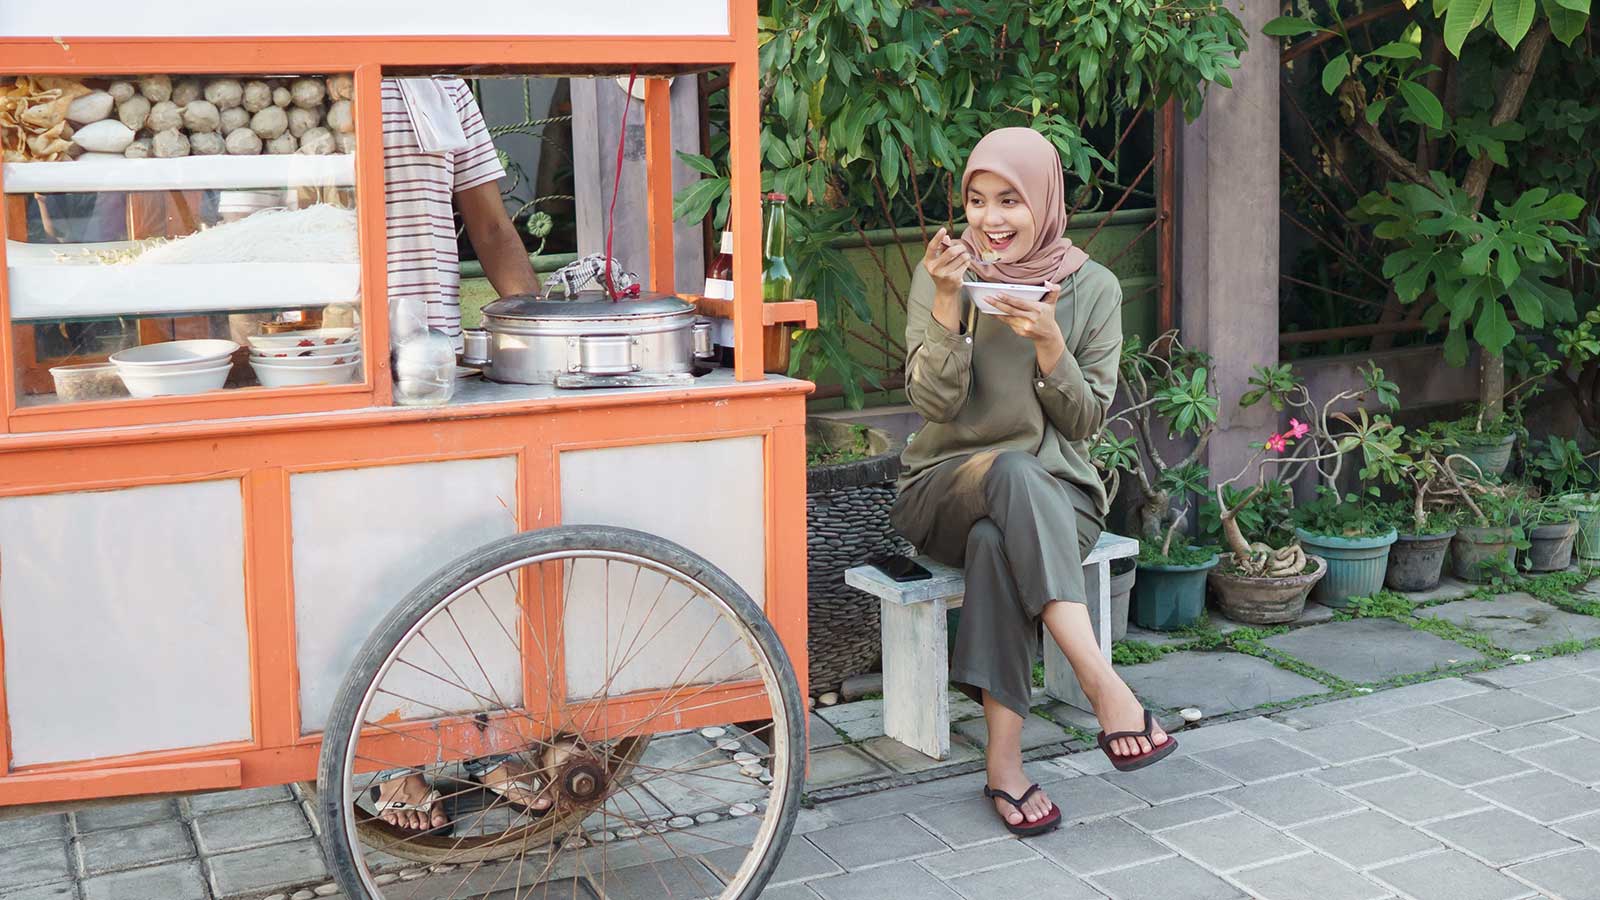 Woman eating at a mobile food cart